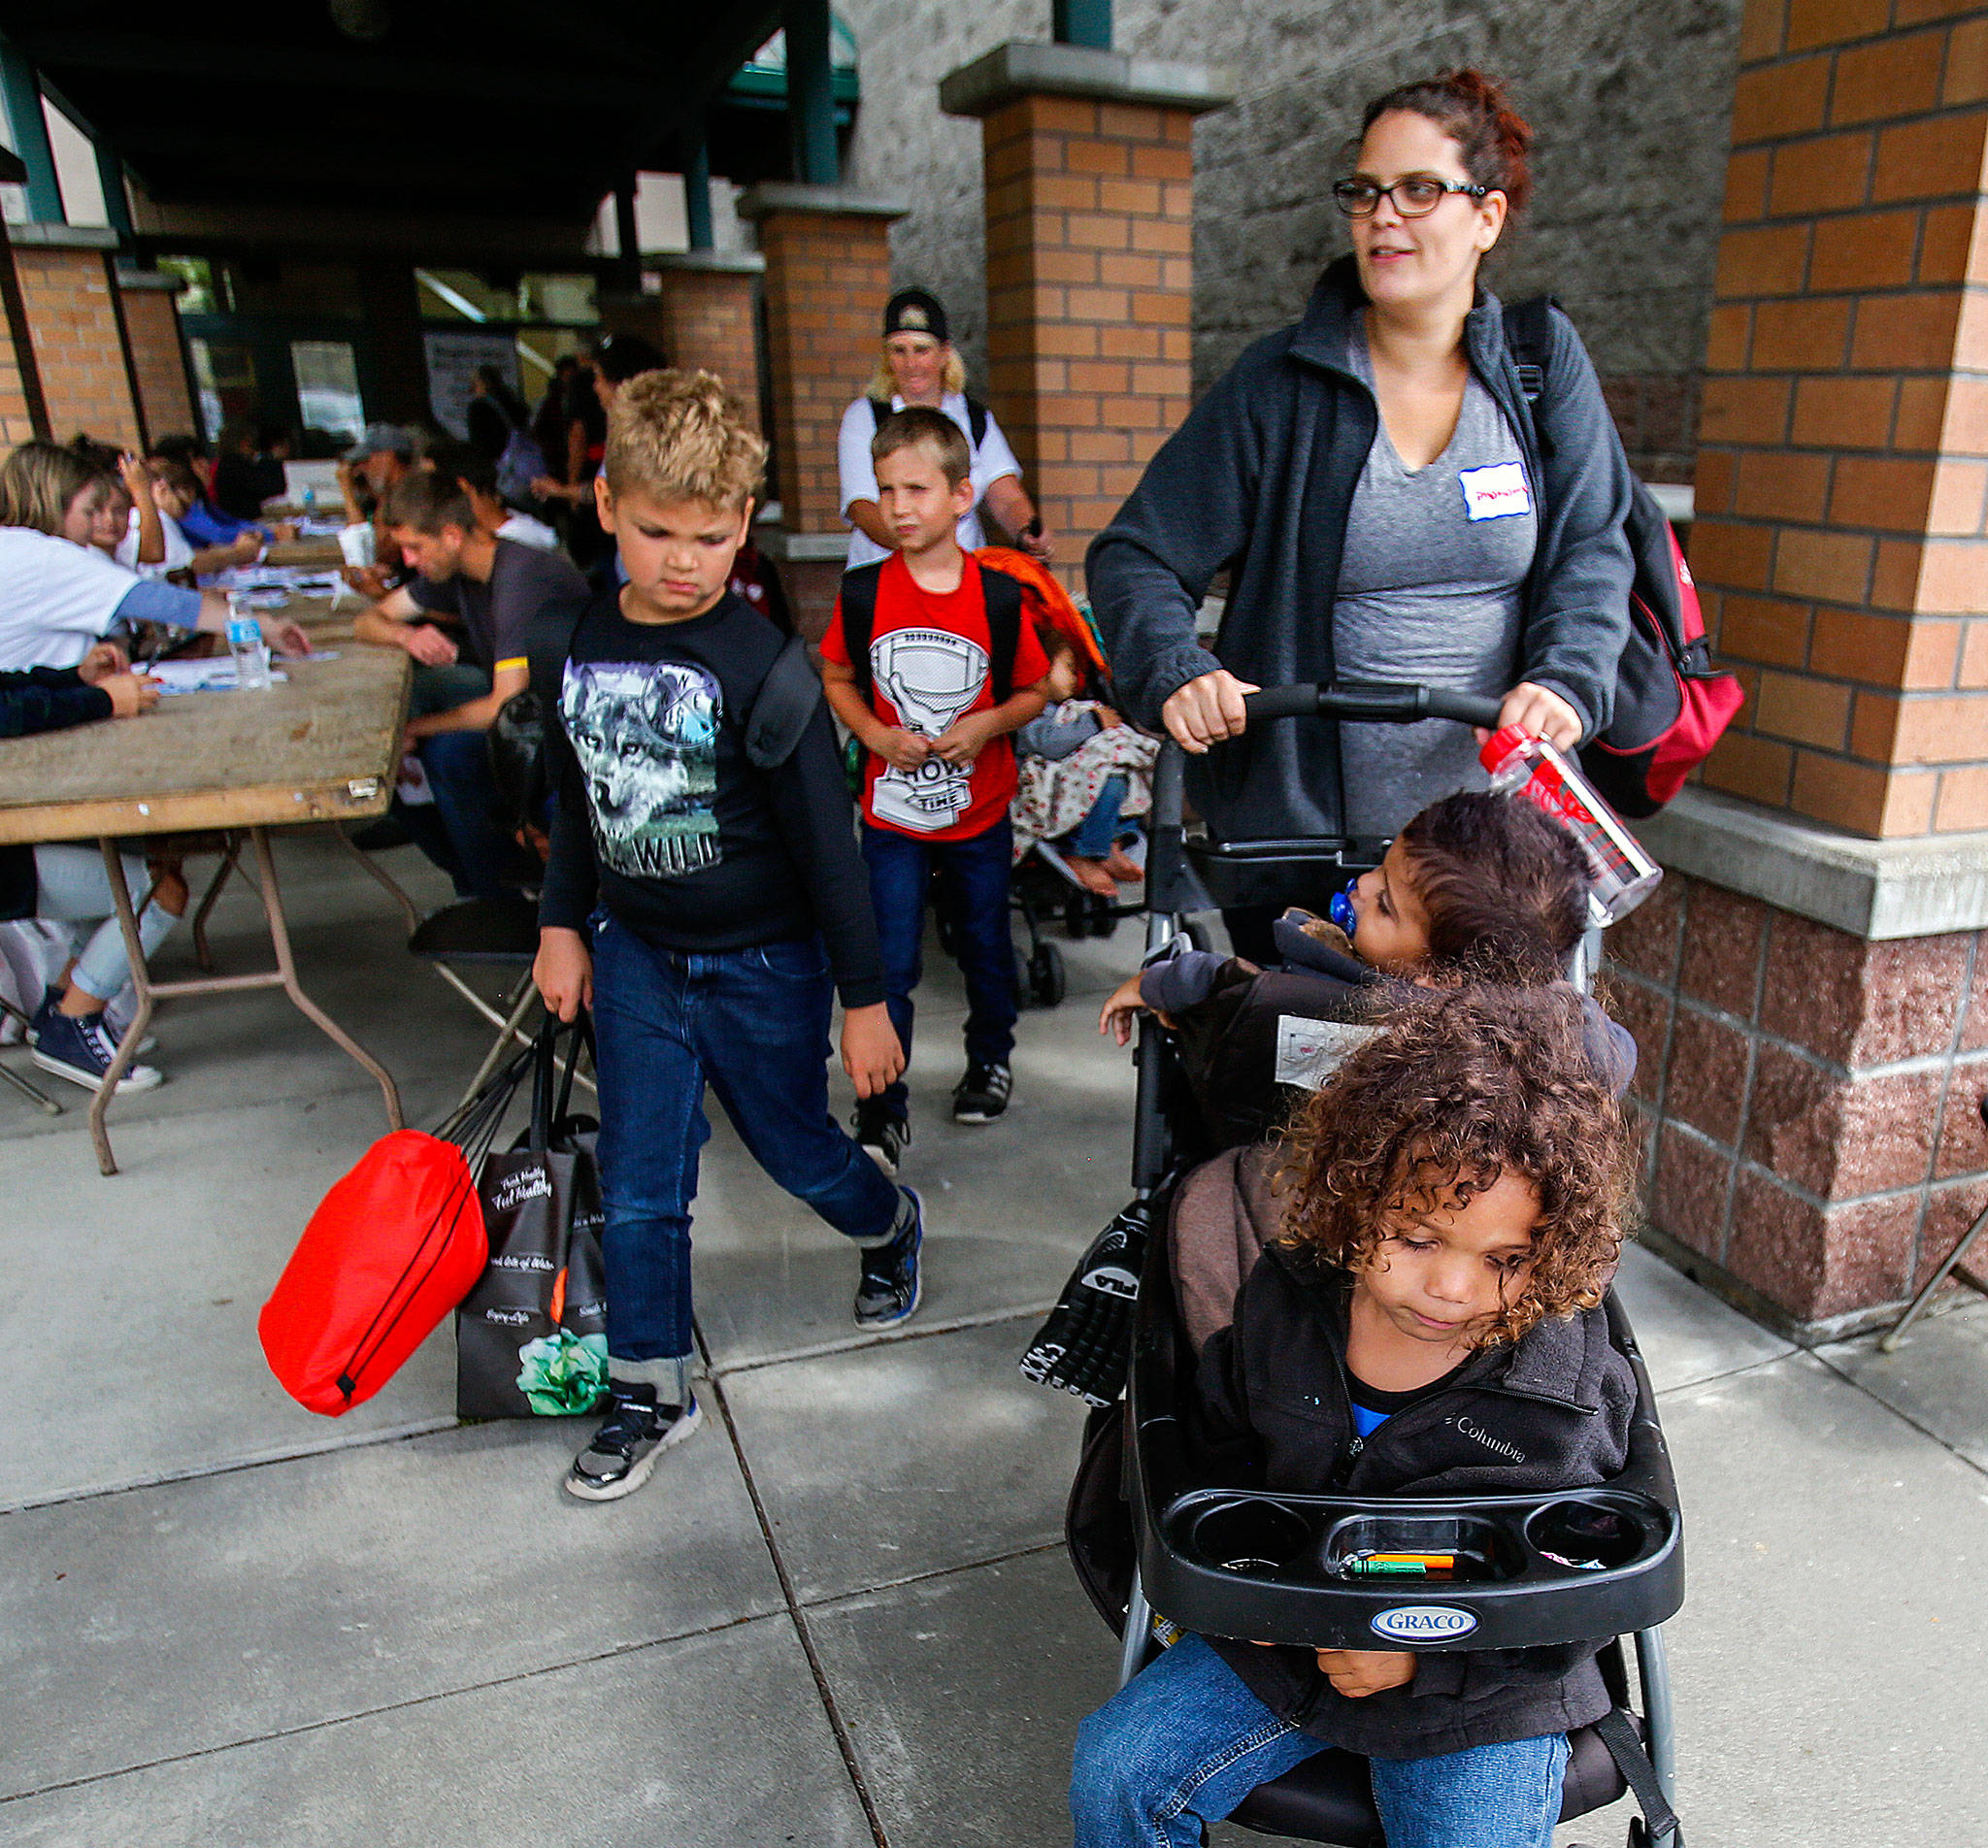 After a successful visit and lunch, Shakarra Borchgrevink leaves Project Homeless Connect 2017 with her four children, ages 1-7, her little brother and her mom Thursday. Just a year ago, Borchgrevink was homeless, yet was able to change that with help she found at Project Homeless Connect. (Dan Bates / The Herald)